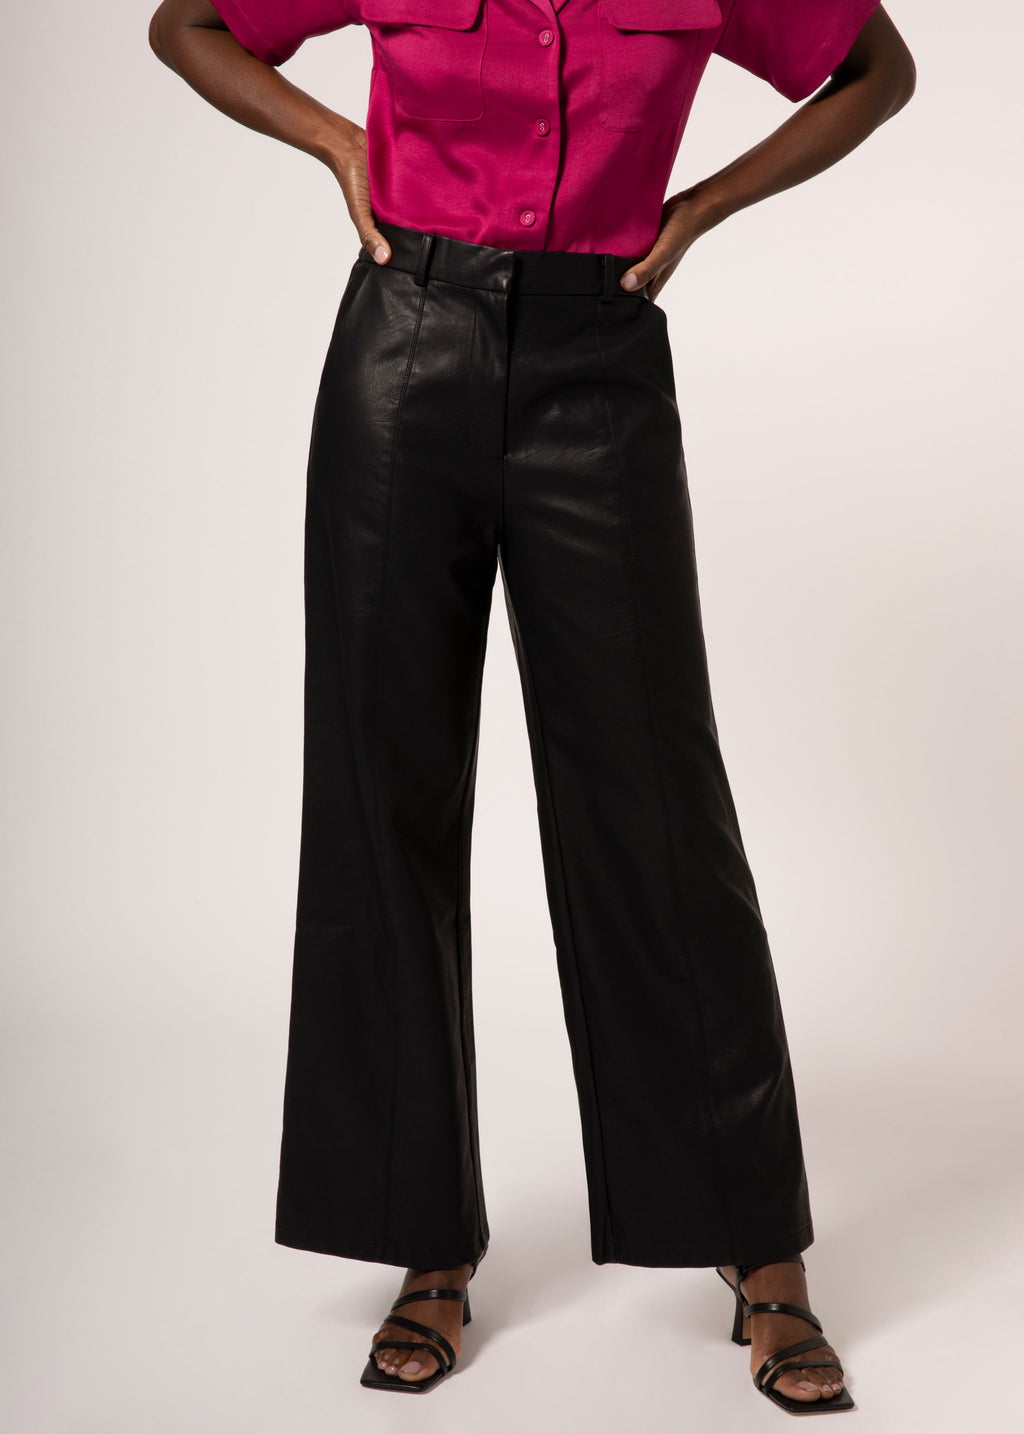 FRNCH Poliana Faux Leather Trousers